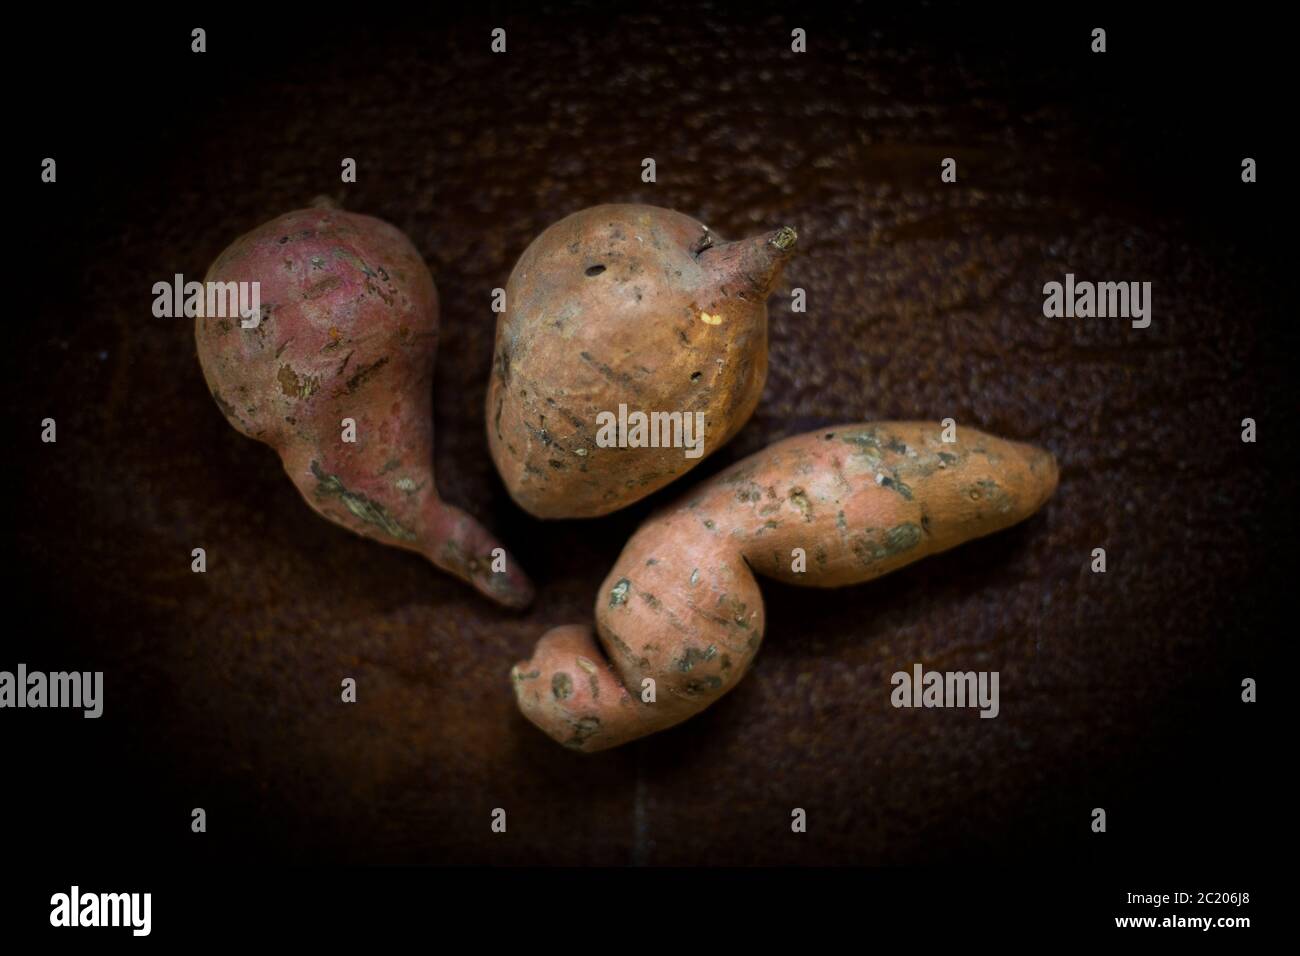 raw sweet potatoes on a wooden table, topview Stock Photo